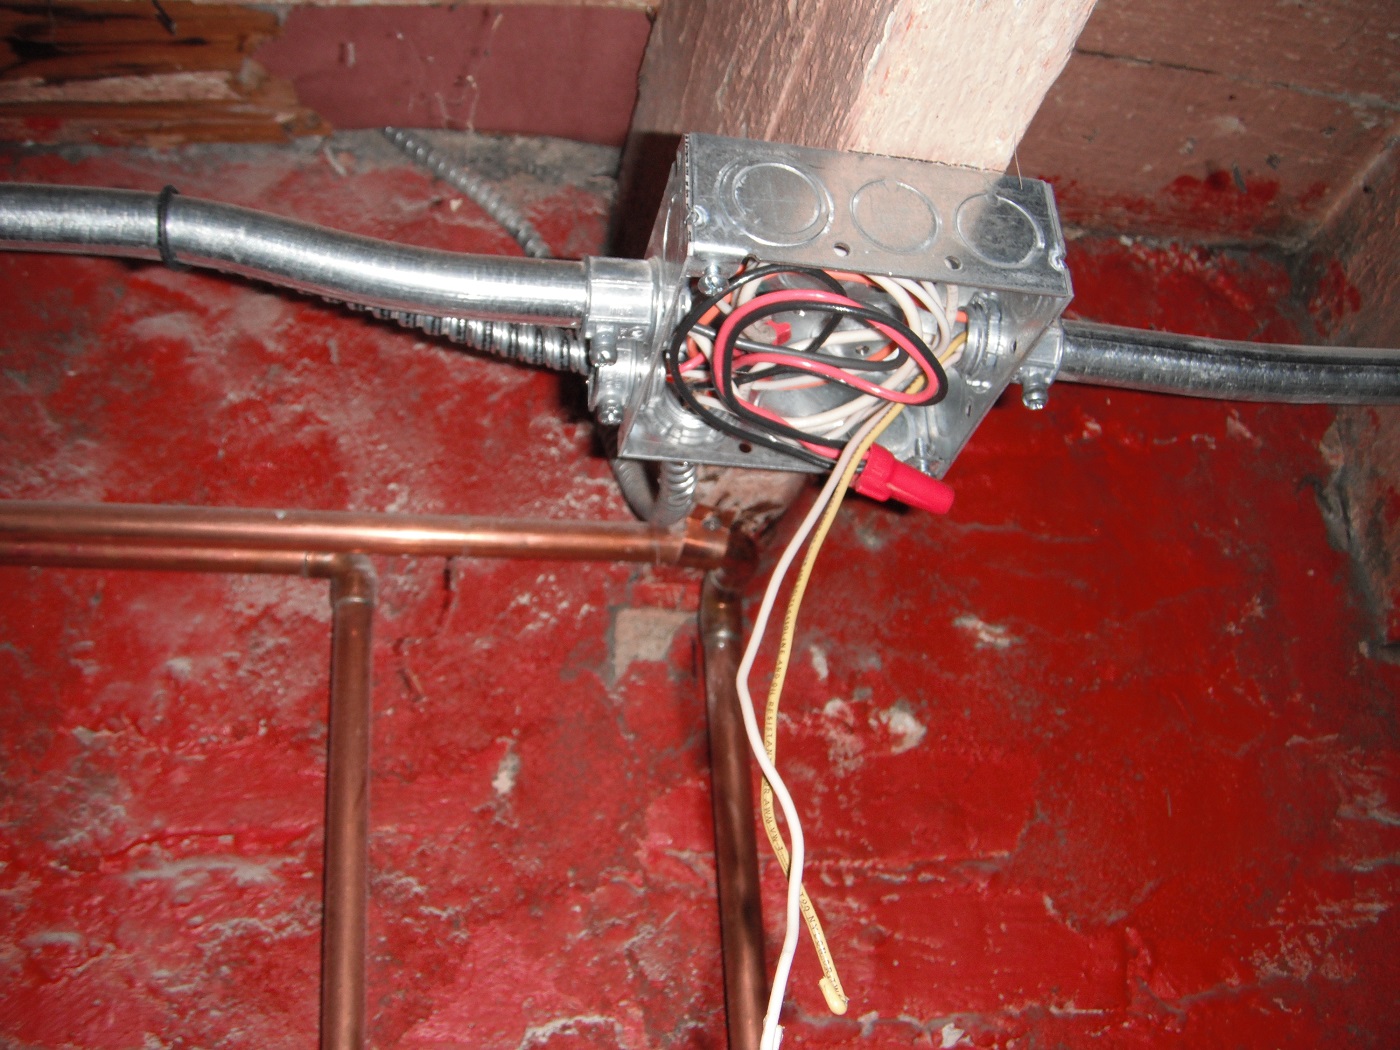 Live electrical wires sticking out of a electrical box. Major safe hazard. "Homer Glen Home Inspection Photo"